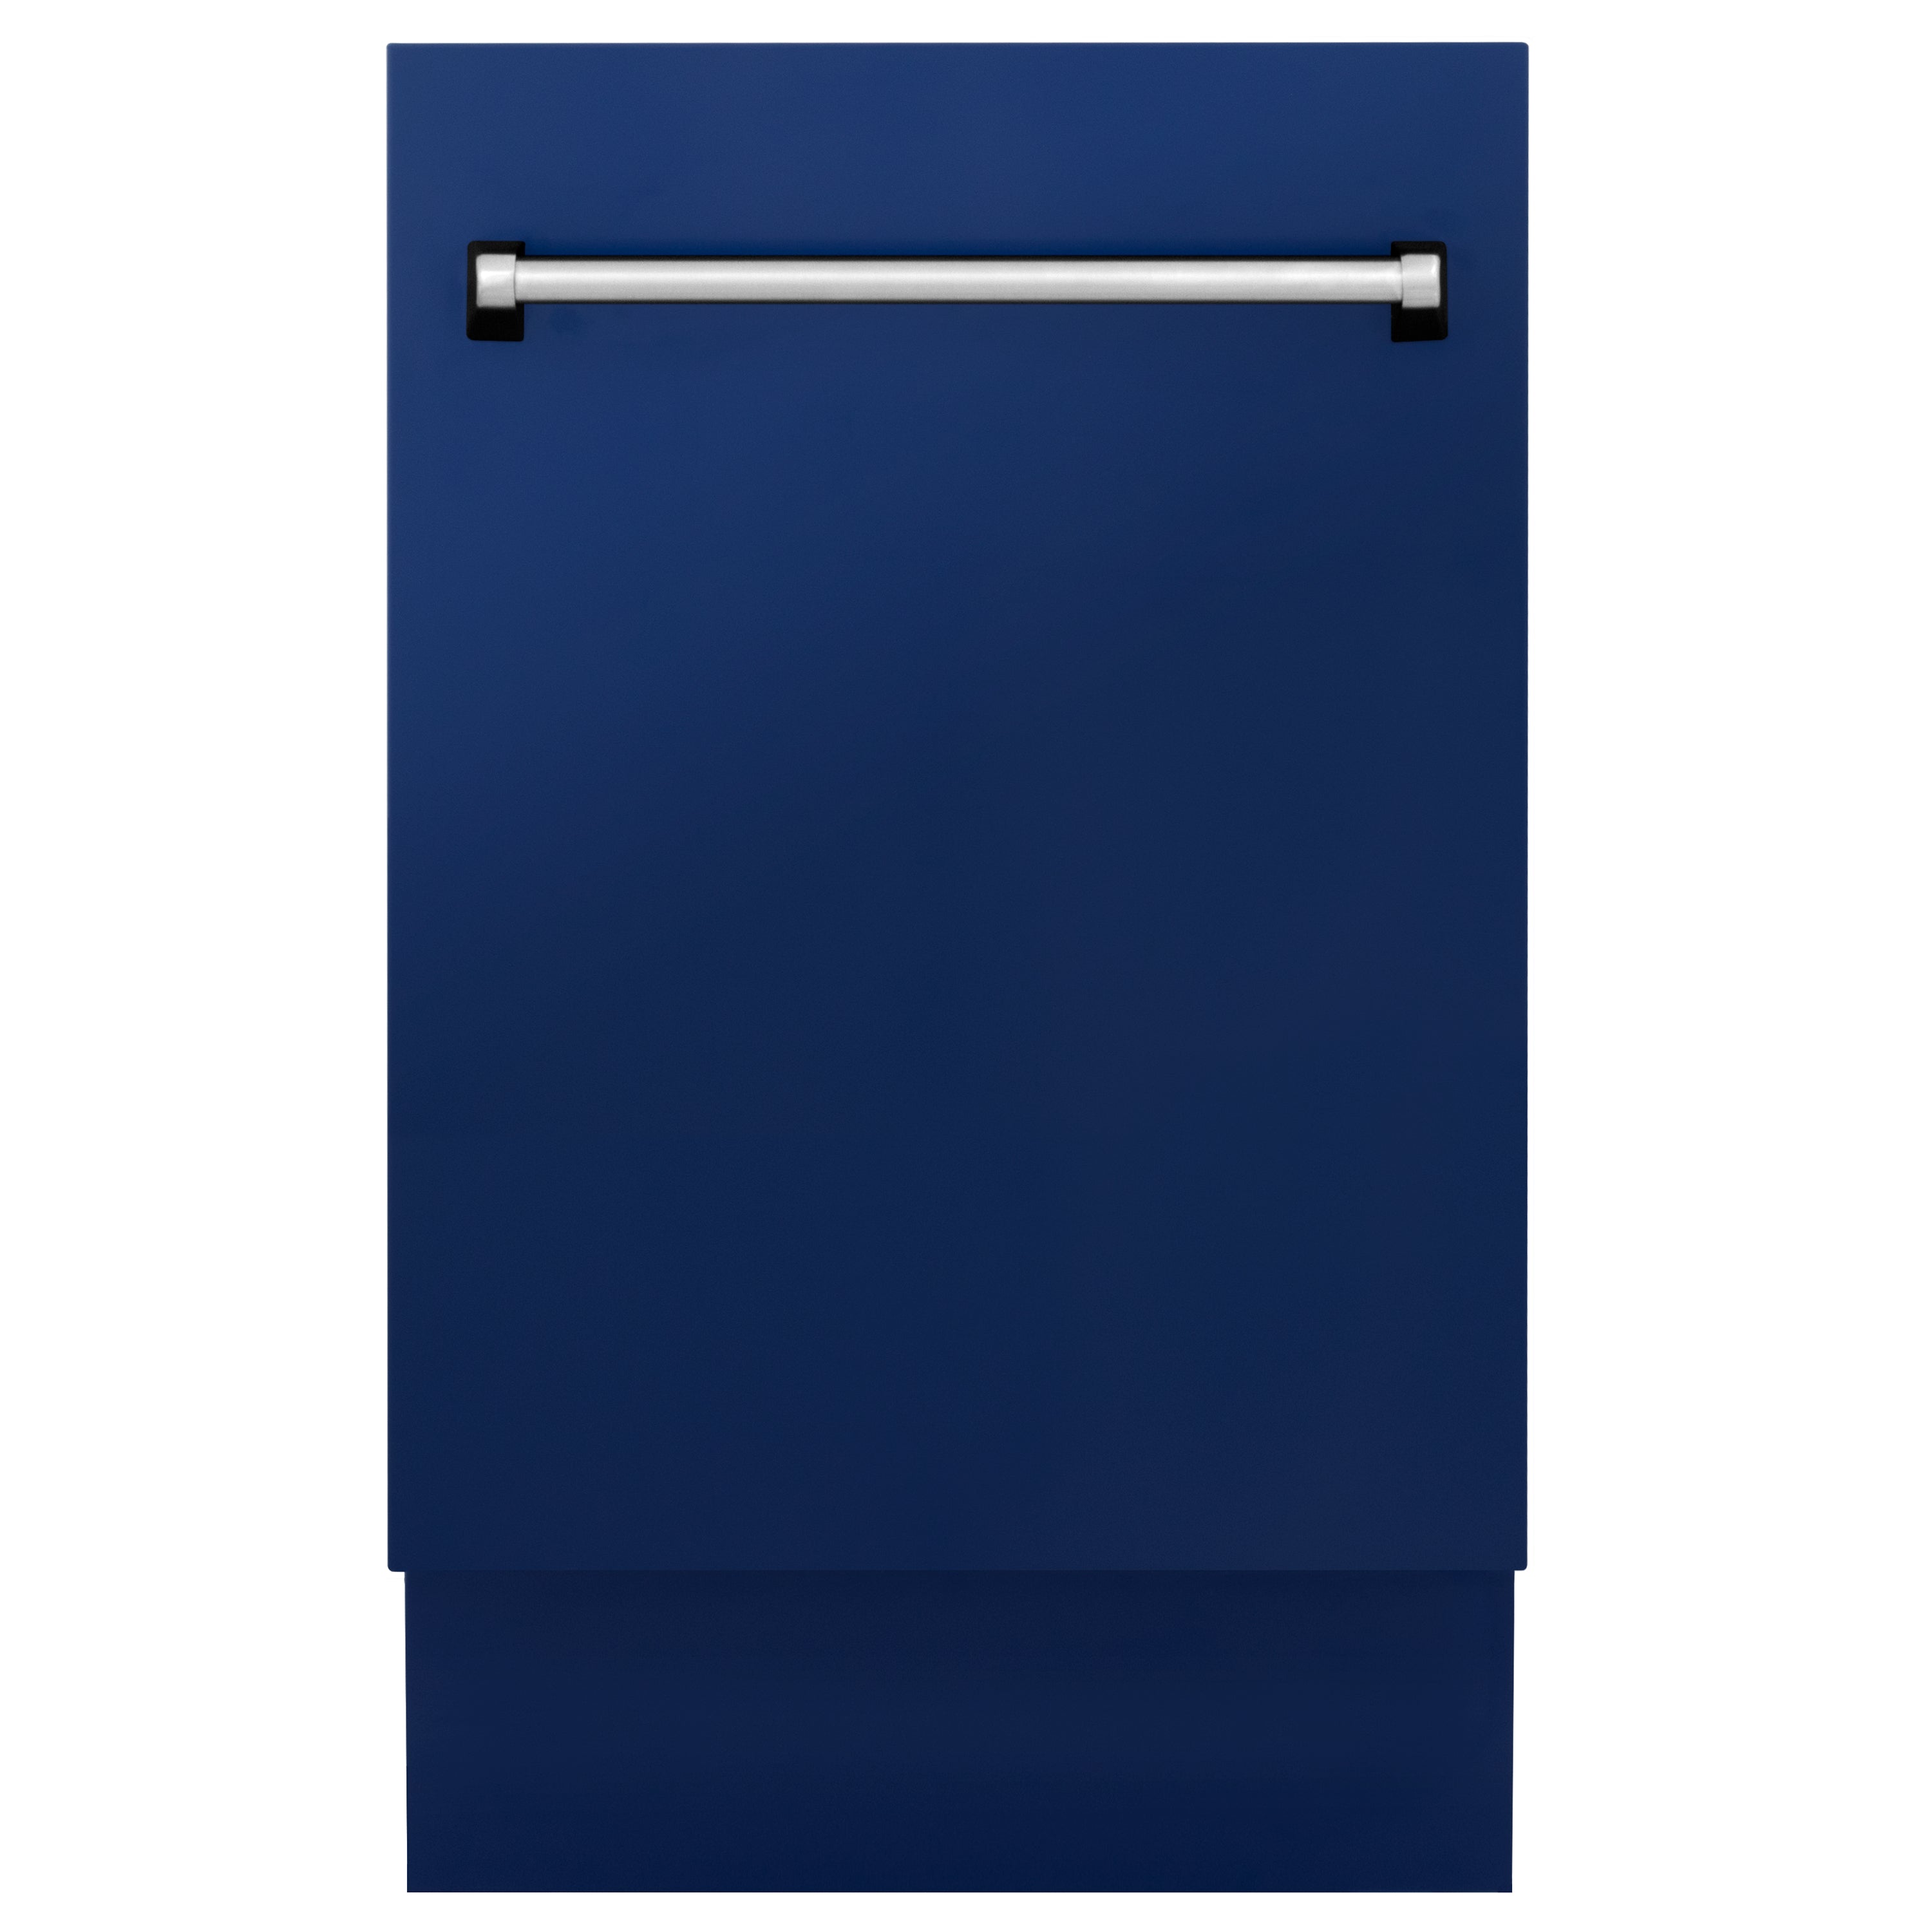 ZLINE 18" Tallac Series 3rd Rack Top Control Built-In Dishwasher in Blue Gloss with Stainless Steel Tub, 51dBa (DWV-BG-18)